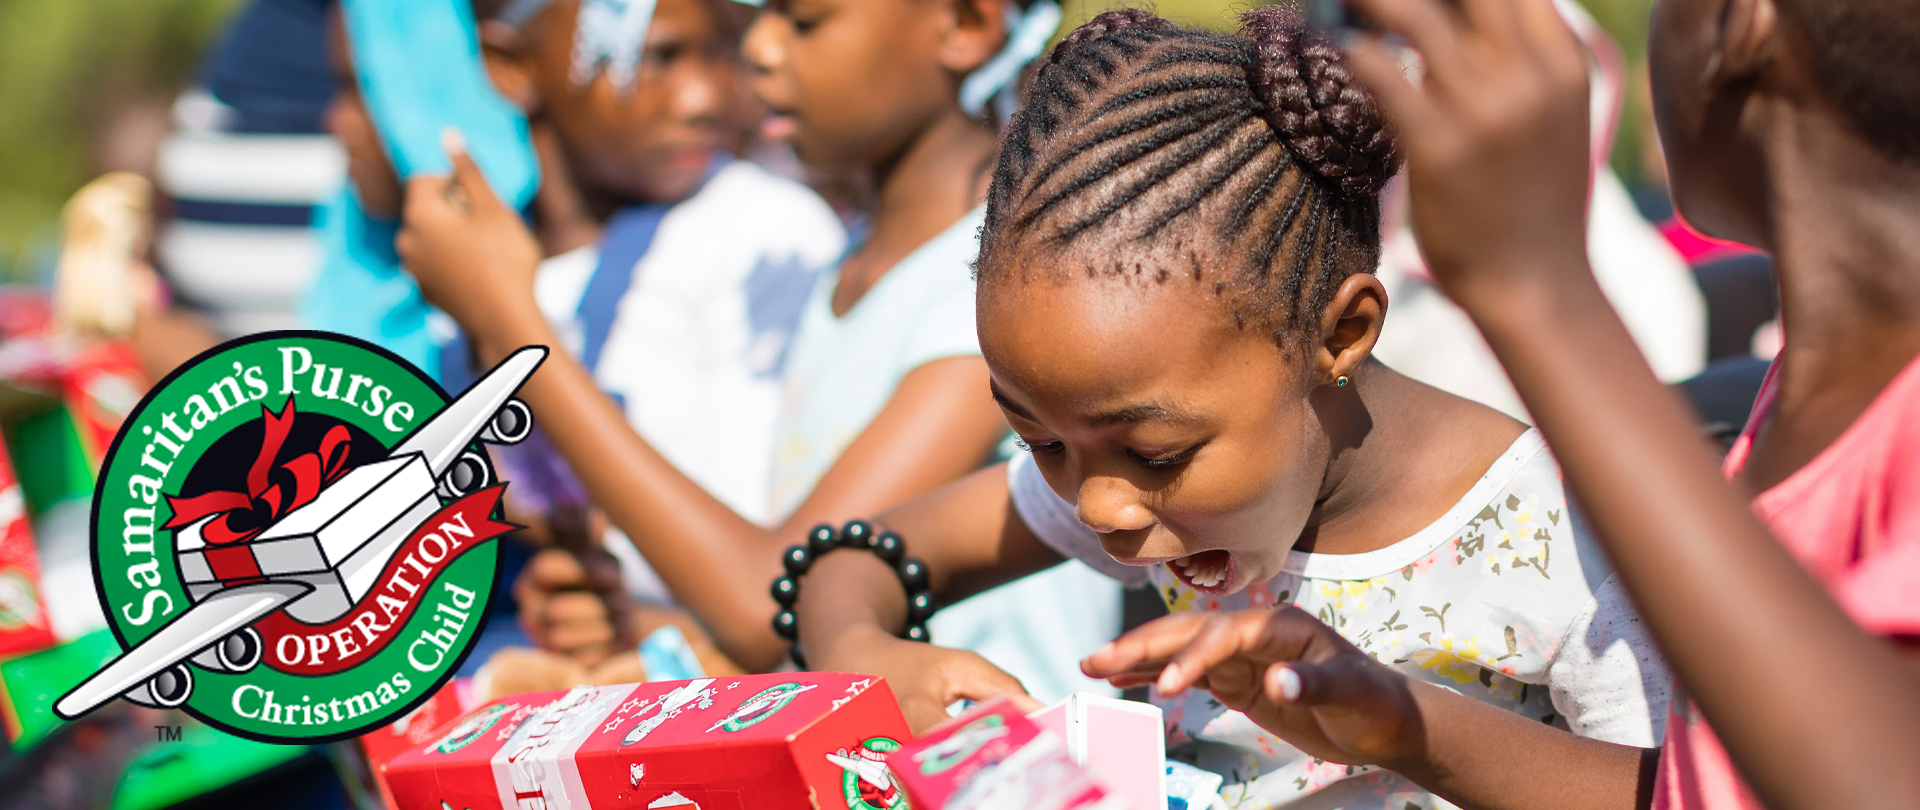 Operation Christmas Child
Community Drop-off Center
Bring your shoebox to Calvary!
